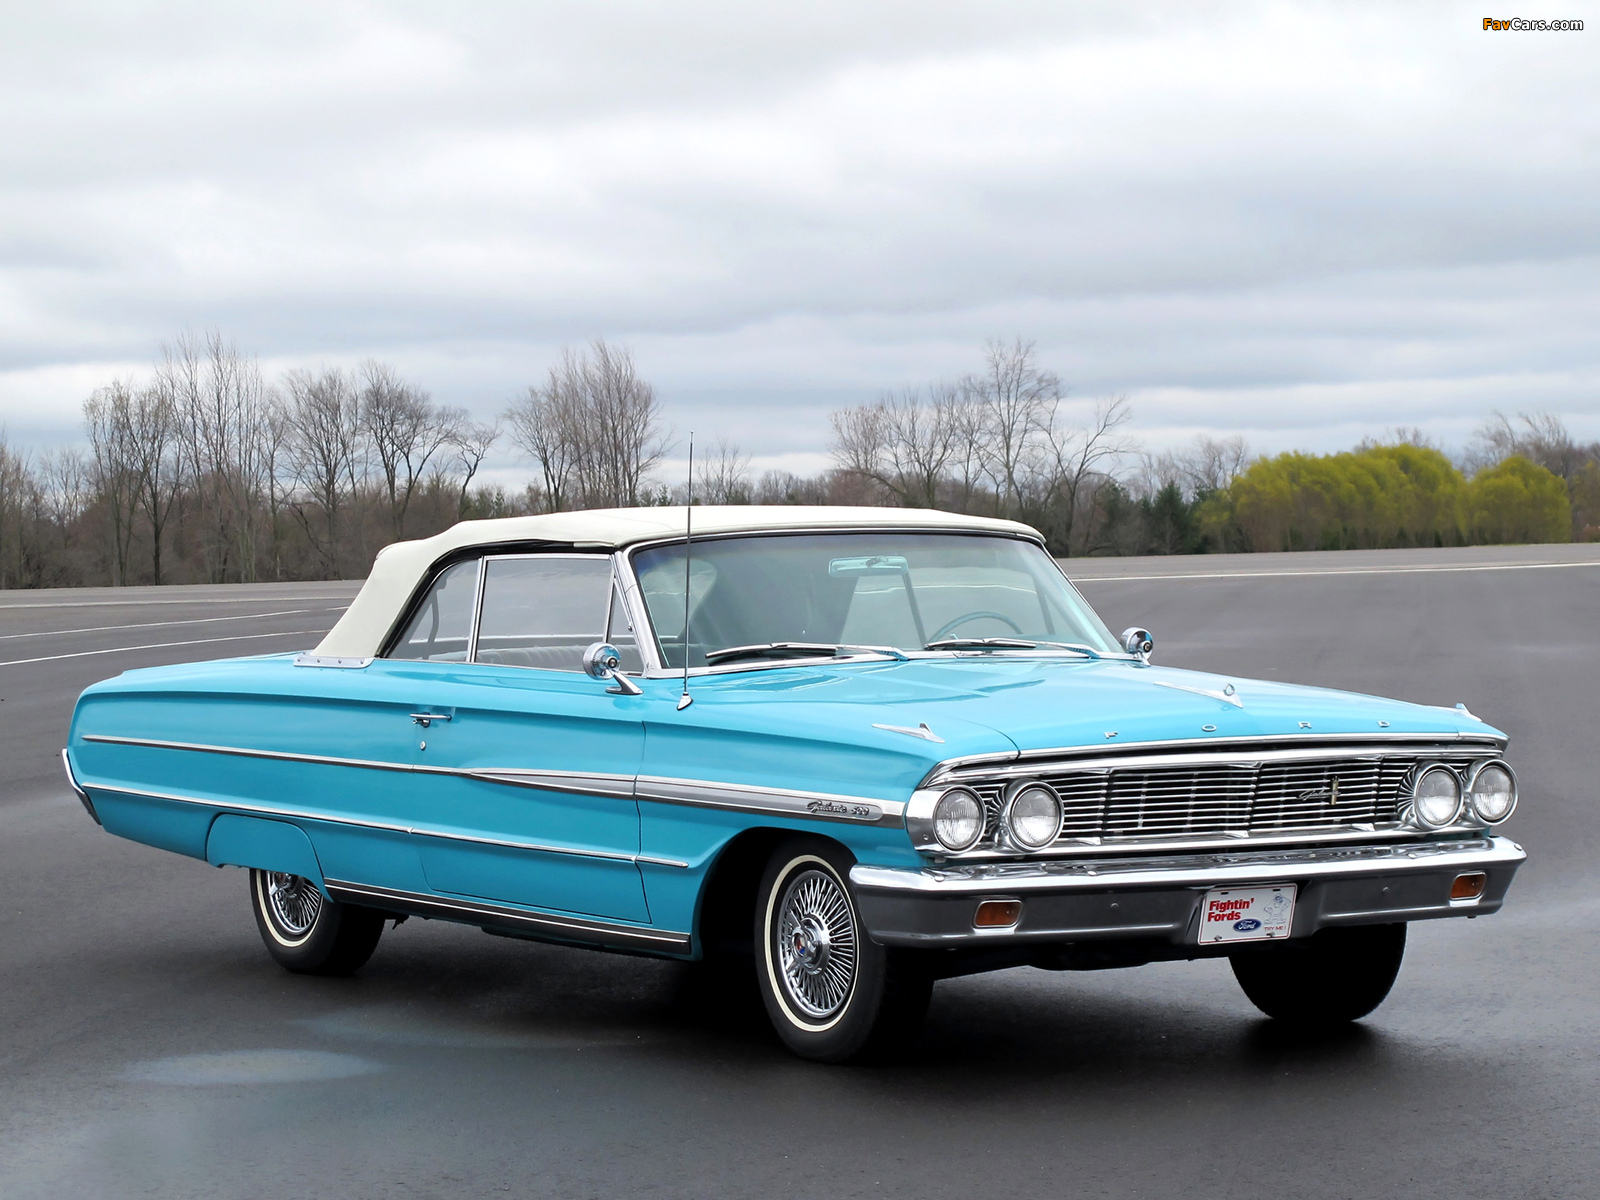 Photos of Ford Galaxie 500 Convertible 1964 (1600 x 1200)